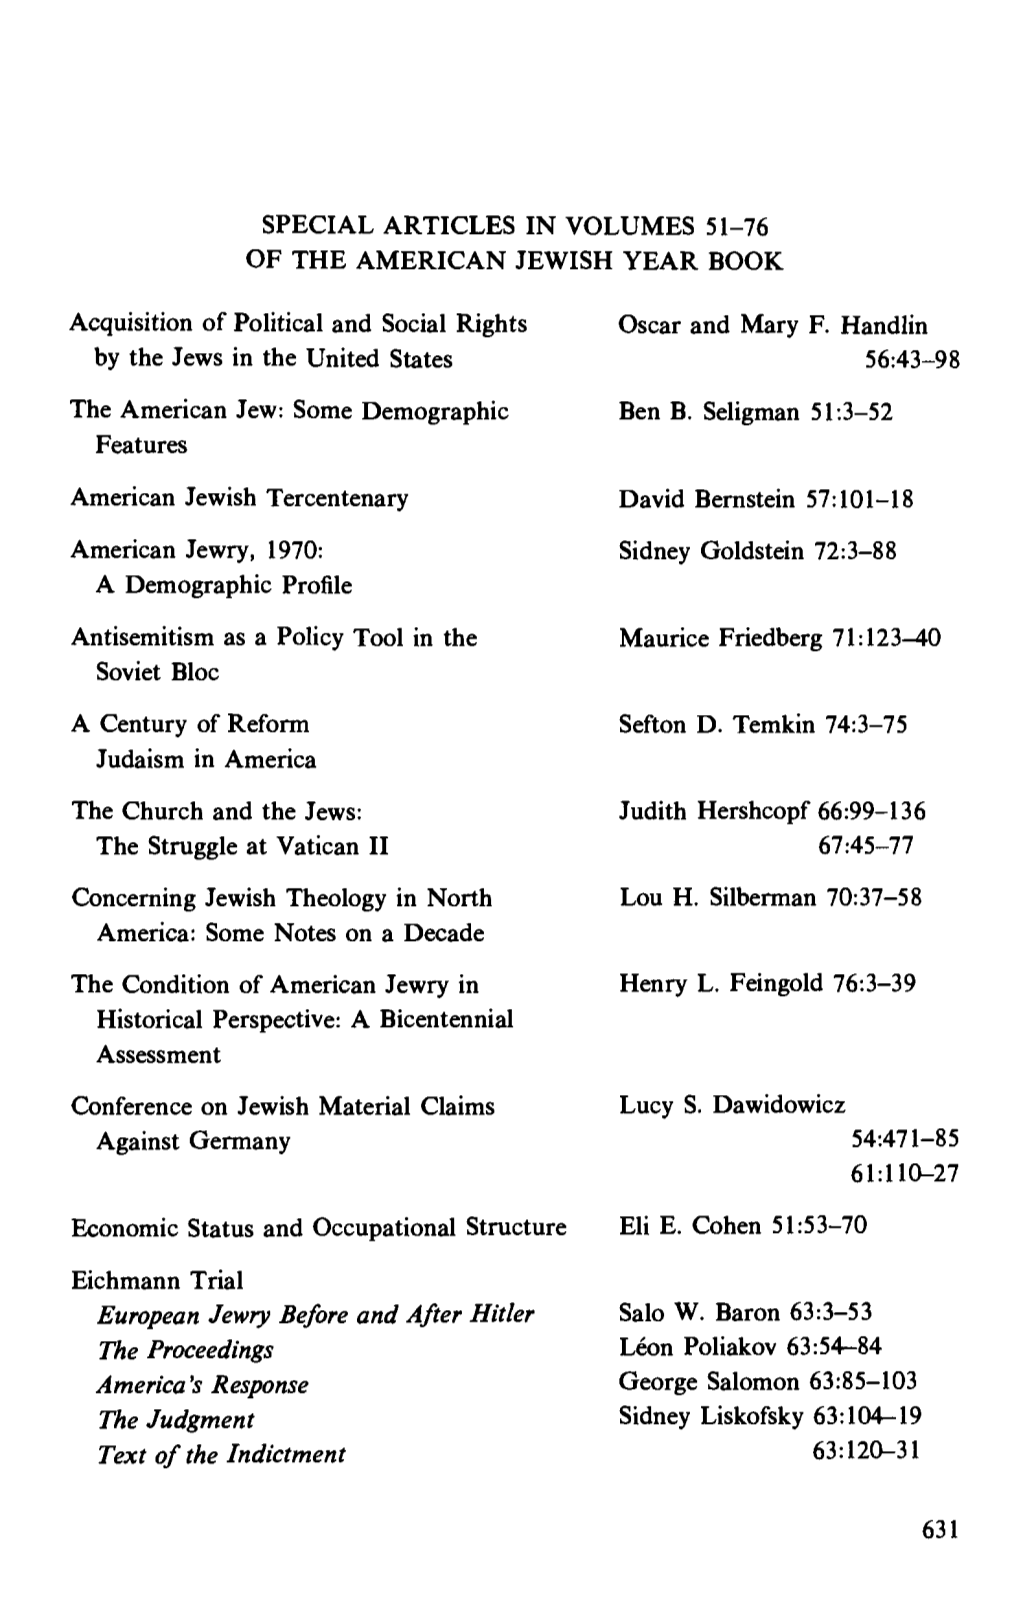 Special Articles in Volumes 51-76 of the American Jewish Year Book